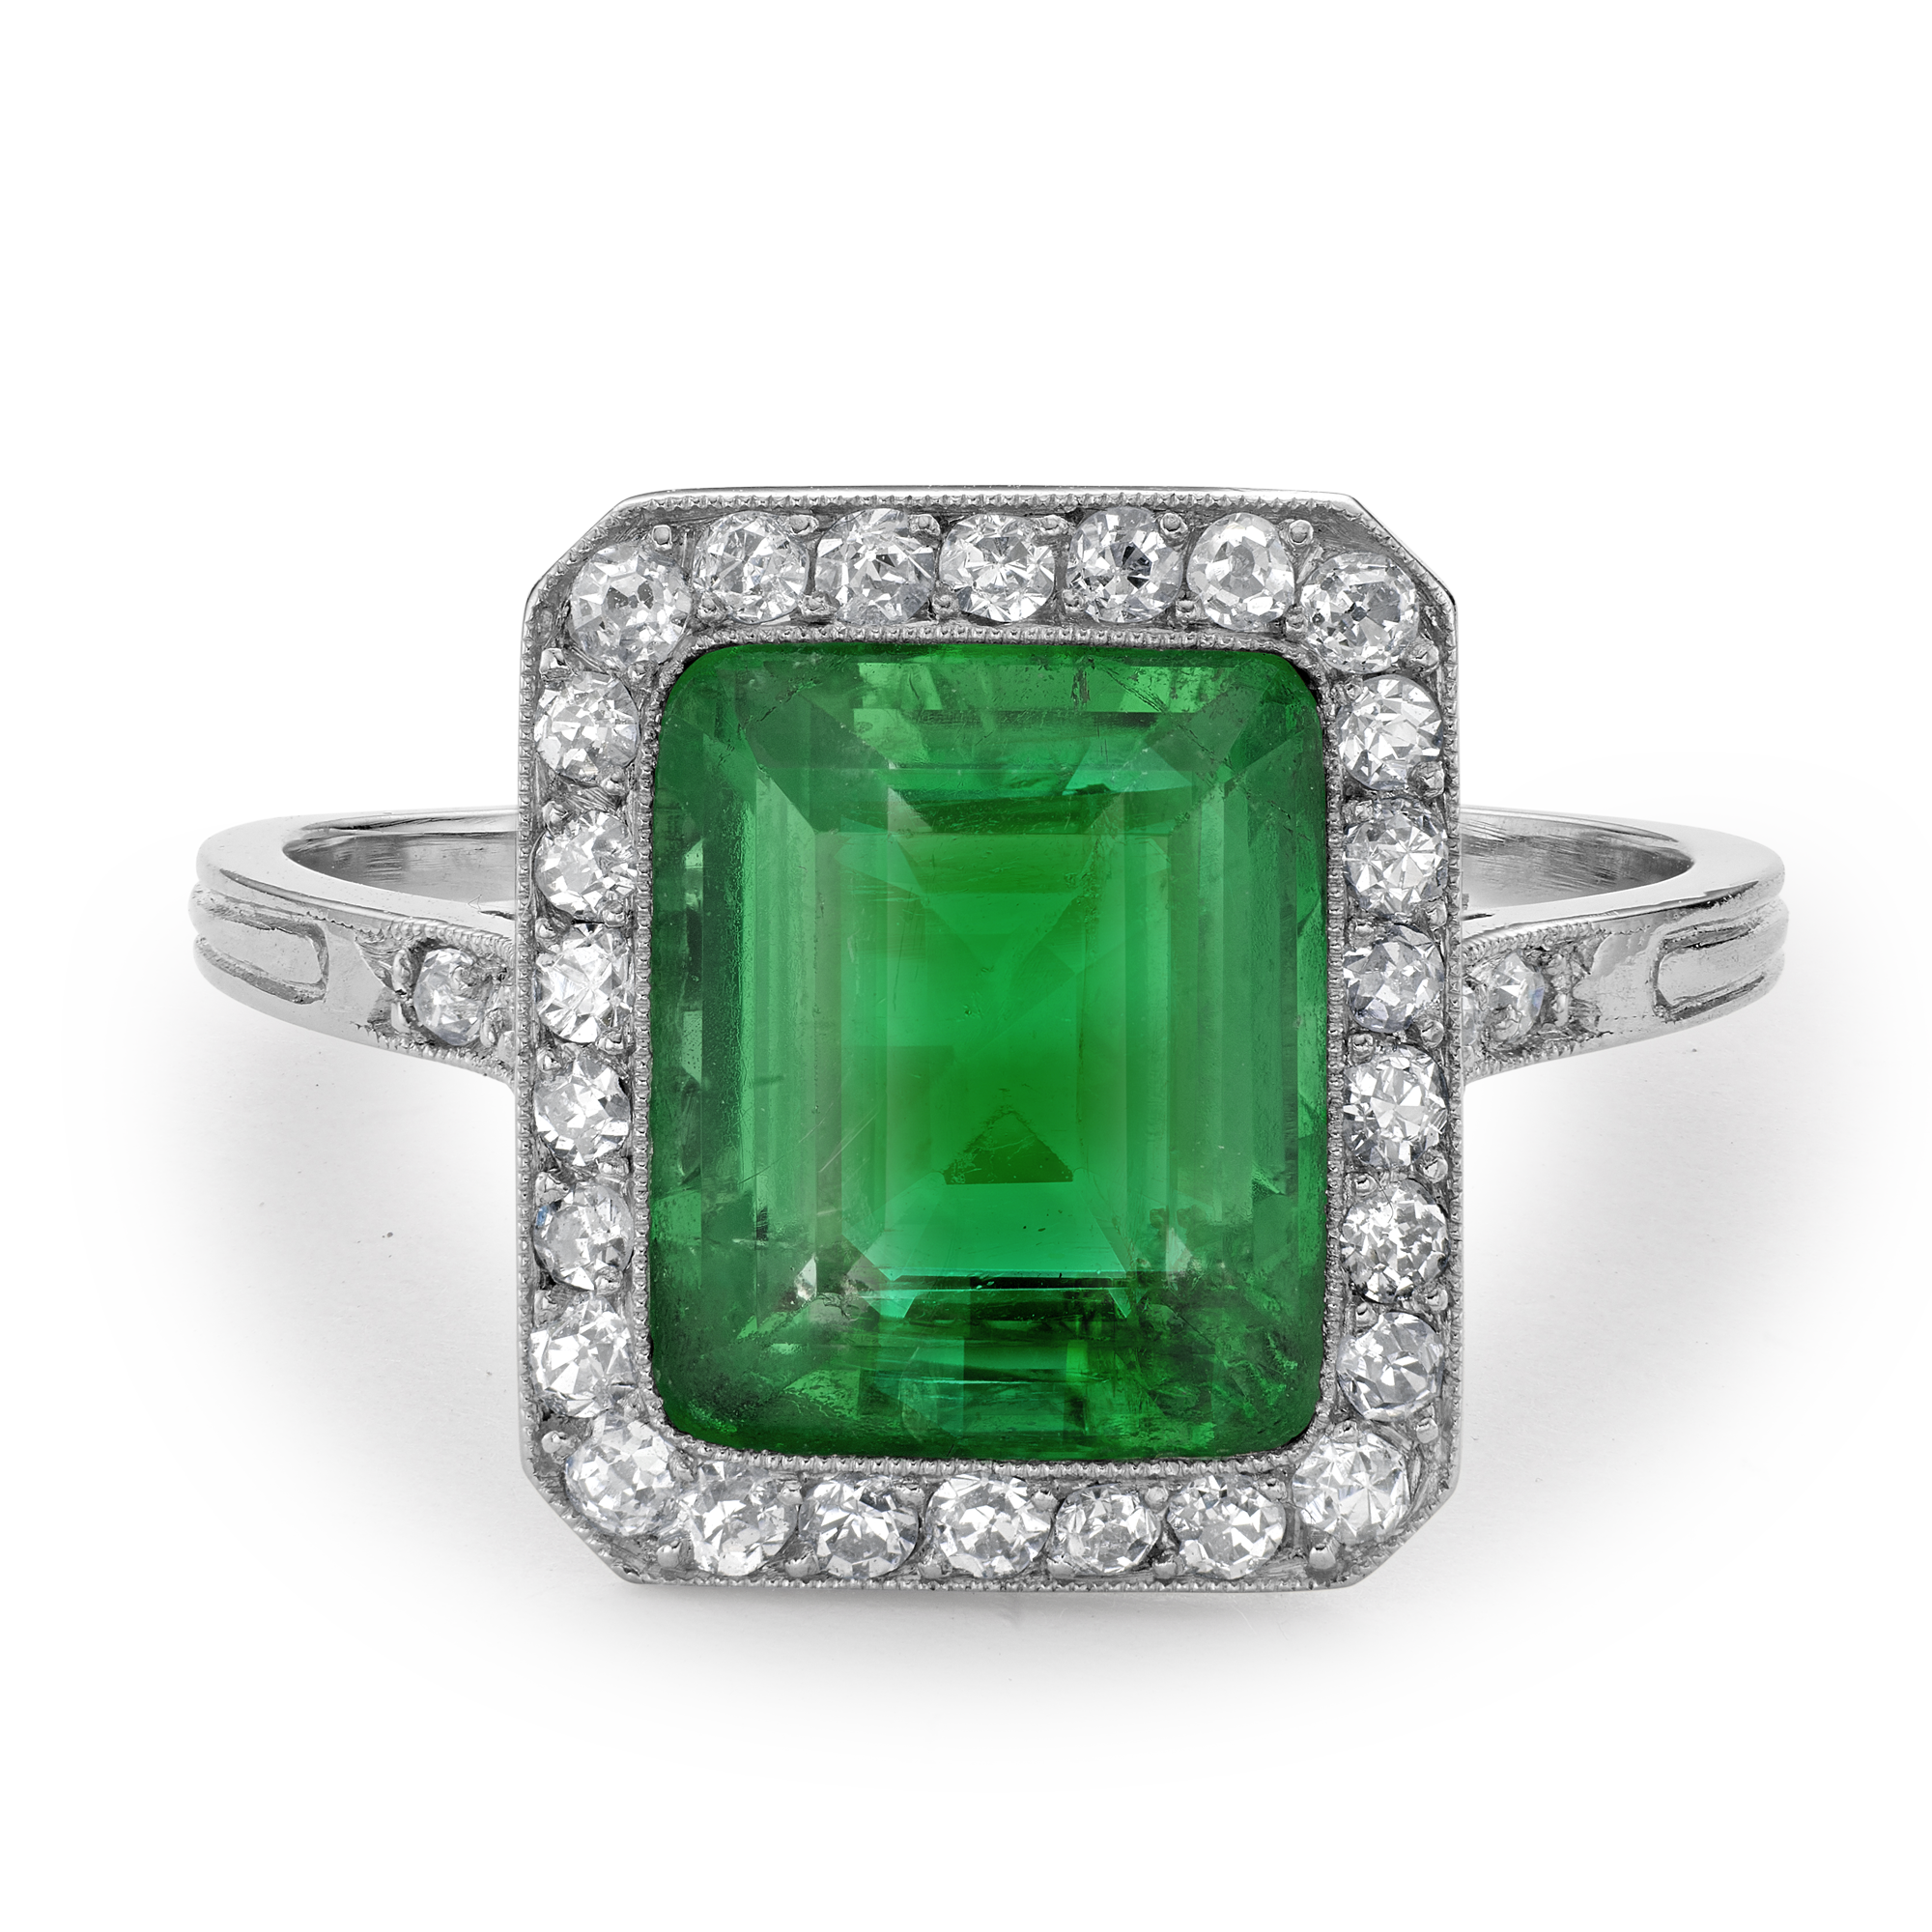 Edwardian 2.80ct Colombian Emerald and Diamond Cluster Ring Emerald Cut, Millegrain Set_2